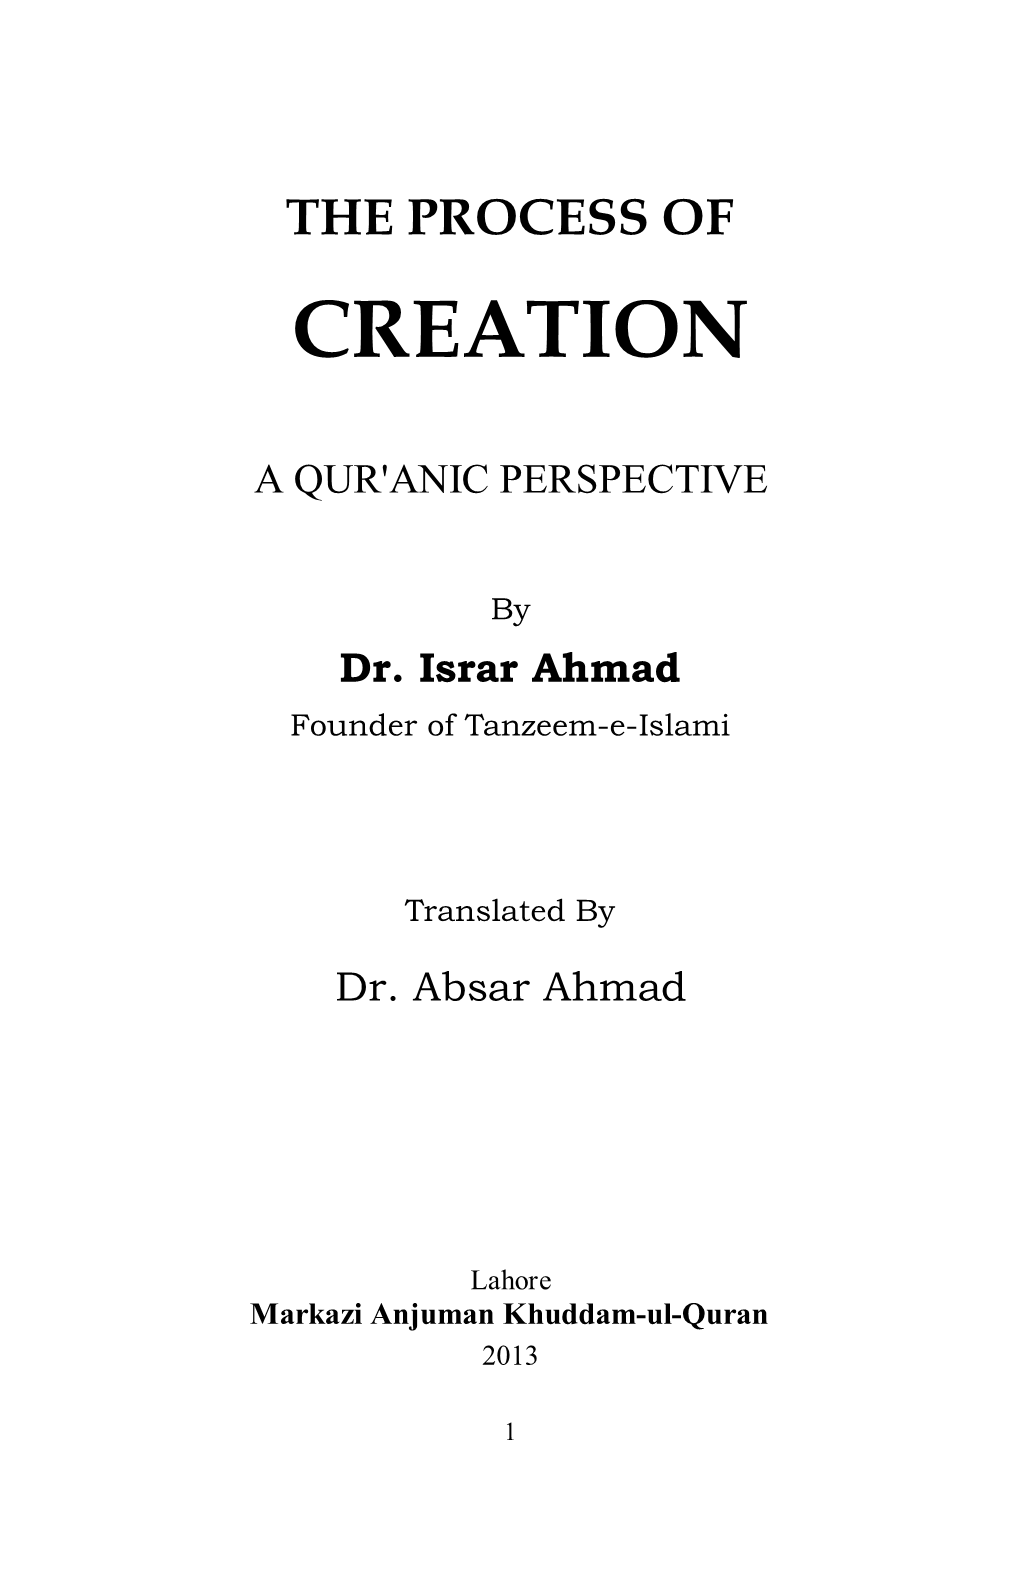 THE PROCESS of CREATION the PROCESS of a QUR'anic PERSPECTIVE اﯾﺠﺎد و اﺑﺪاع ﻋﺎﻟﻢ ﺳﮯ ﻋﺎﻟﻤﯽ ﻧﻈﺎم ﺧﻼﻓﺖ ﺗﮏ :Urdu Name ﺗﻨﺰل اور ارﺗﻘﺎ ﮐﮯ ﻣﺮاﺣﻞ